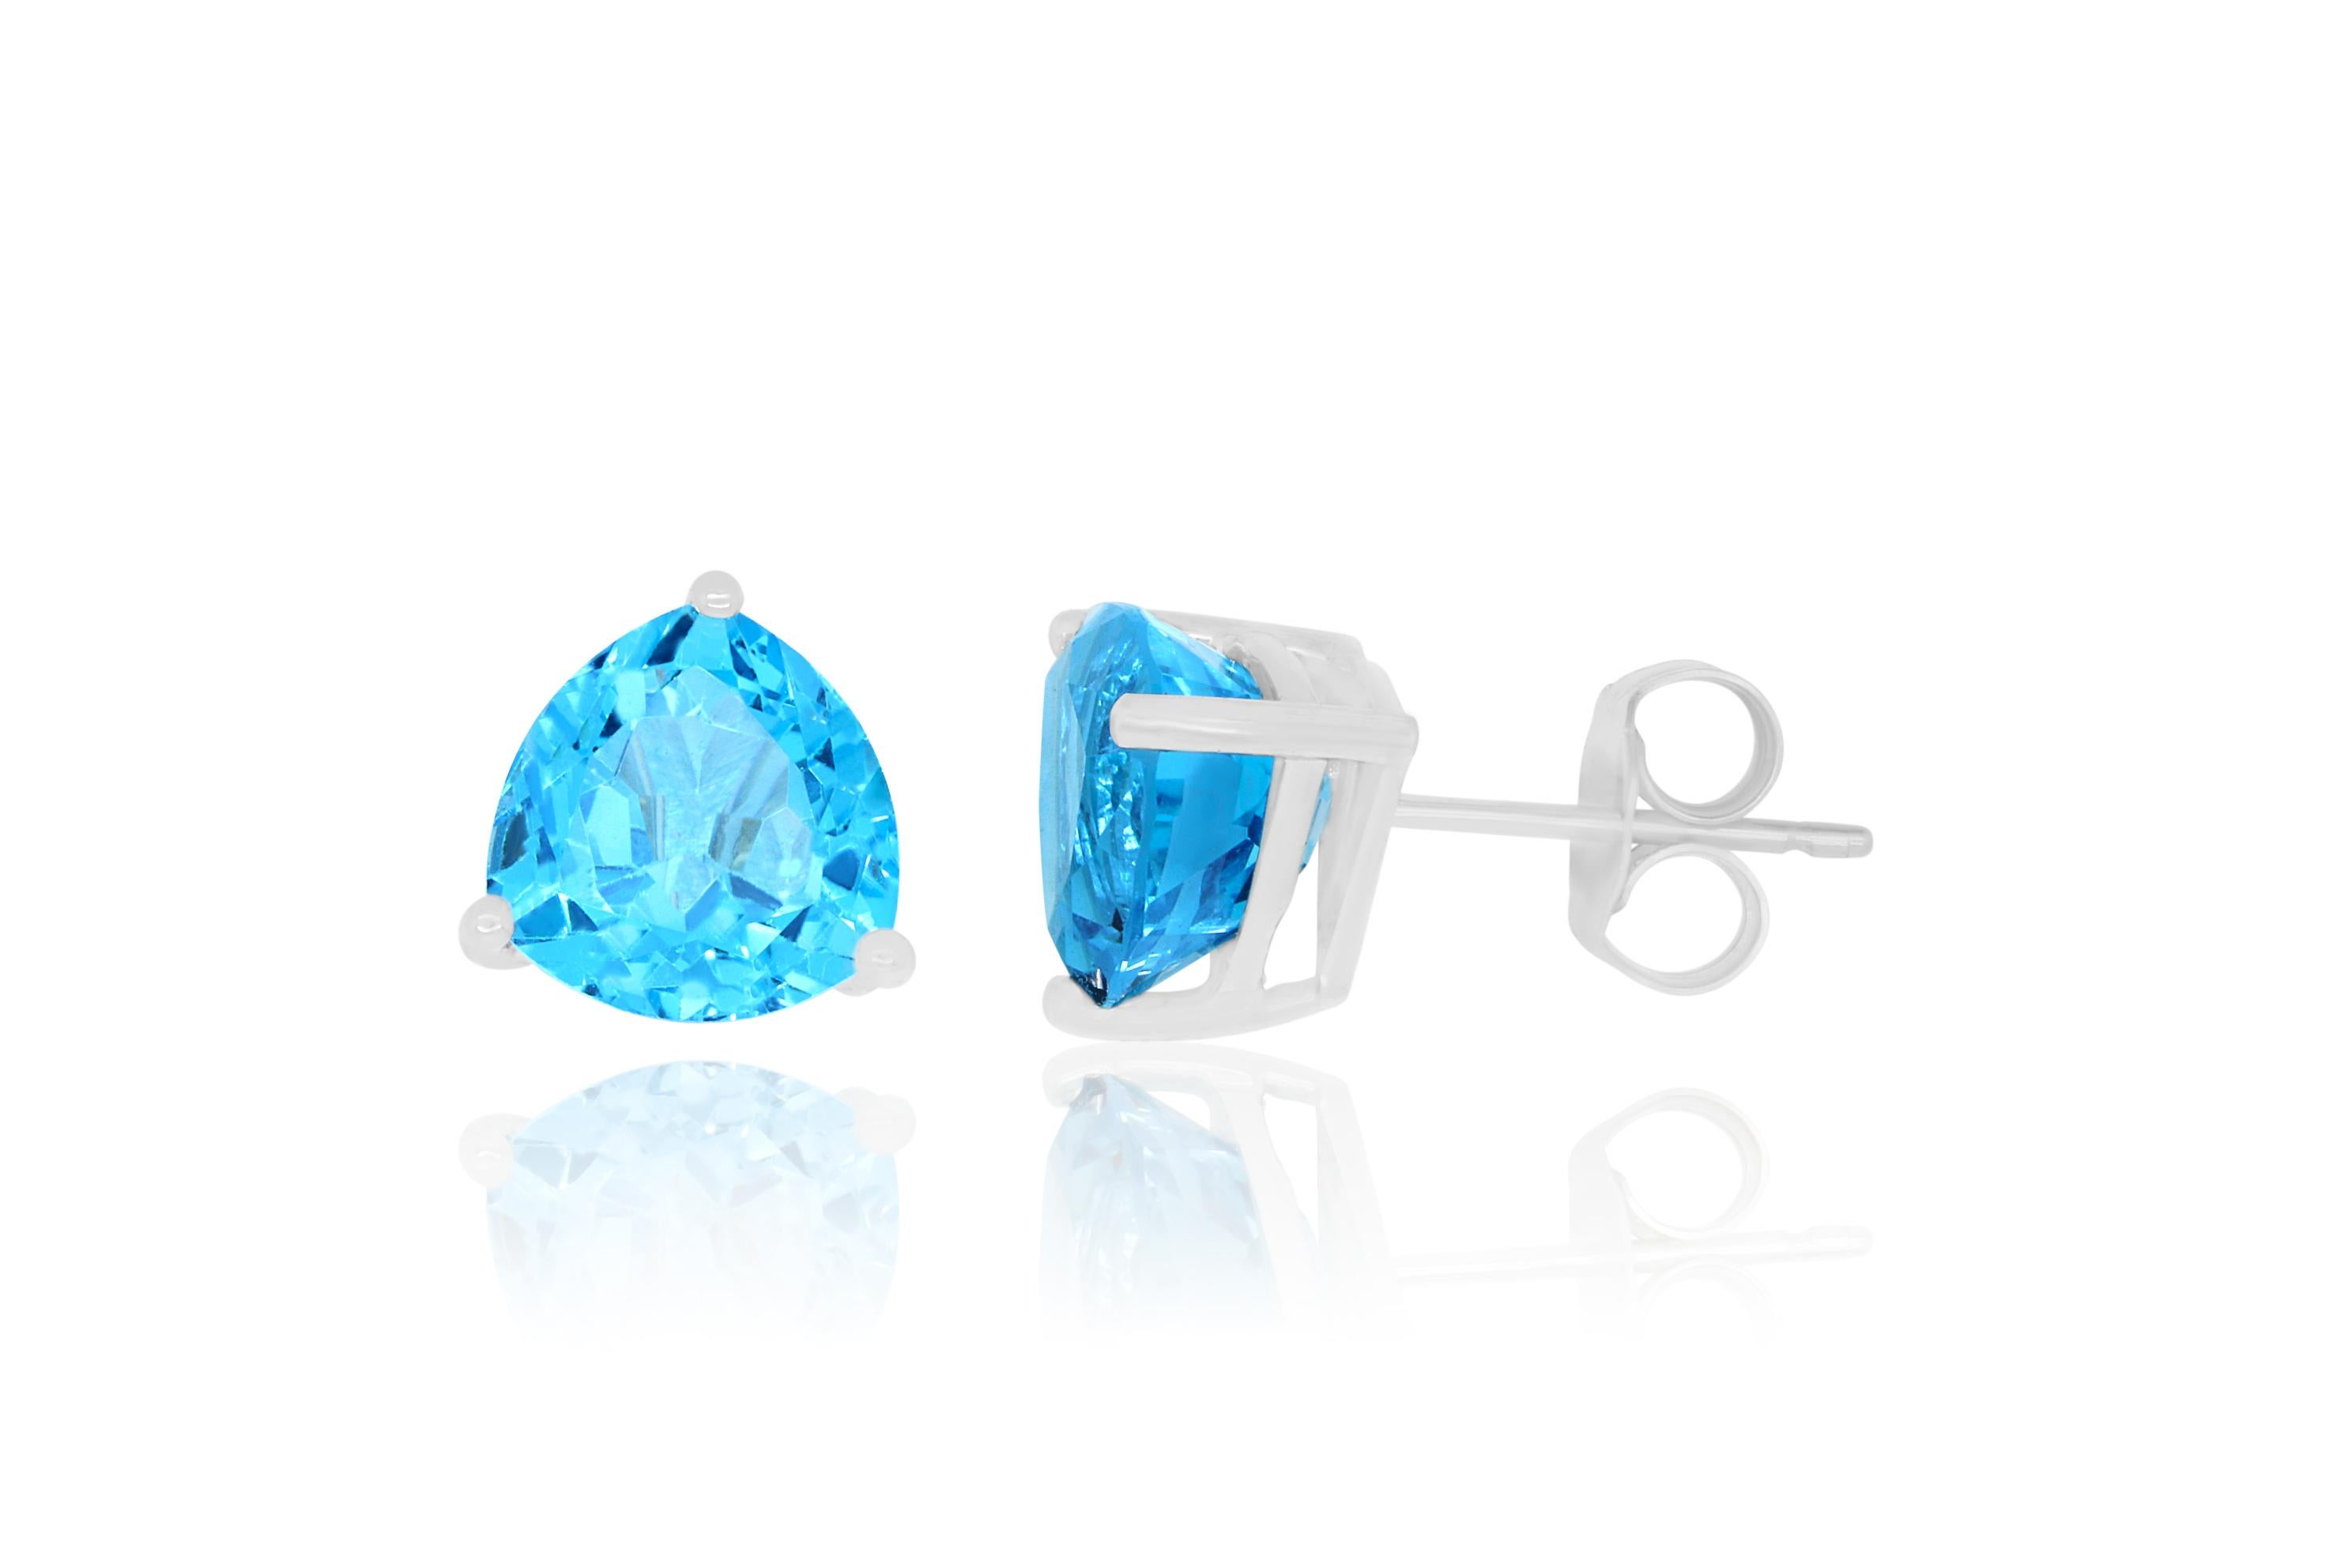 We've taken the classic pair of studs and brought it to life with 2 brightly shimmering Trillion Blue Topaz's. At 7.11 Carats, we knew it was a match made in heaven when we found these unique stones, matching so perfectly in quality and size.